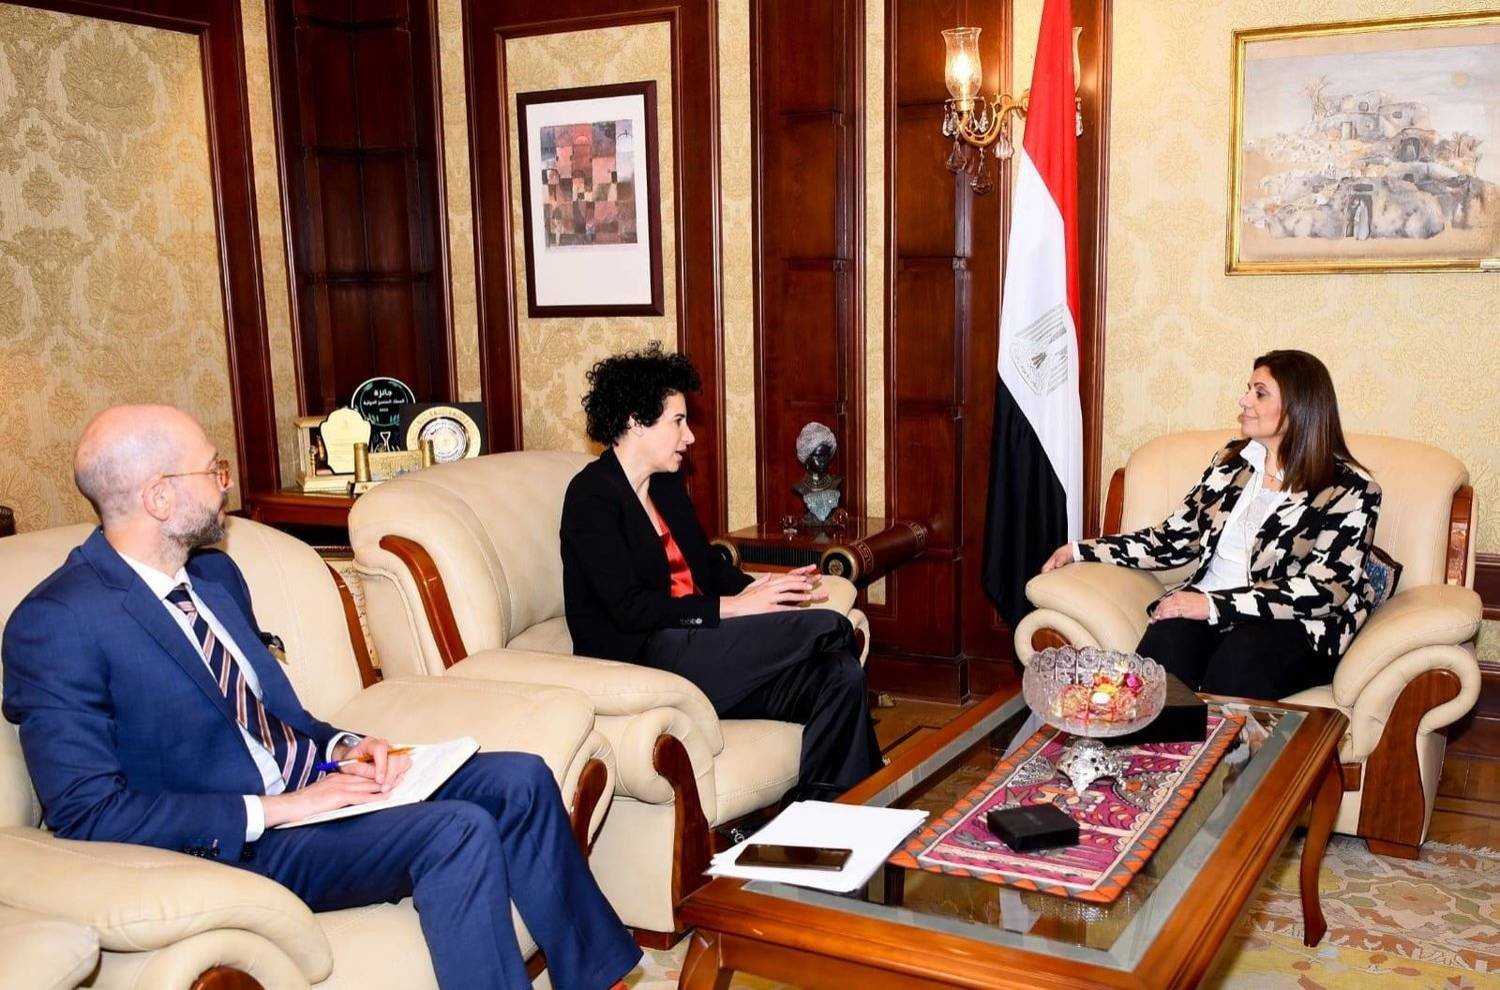 Egyptian Minister of Emigration and Expatriate Affairs Soha Gendy meets with Cypriot Ambassador to Egypt Polly Ioannou in Cairo. (Egyptian government) 